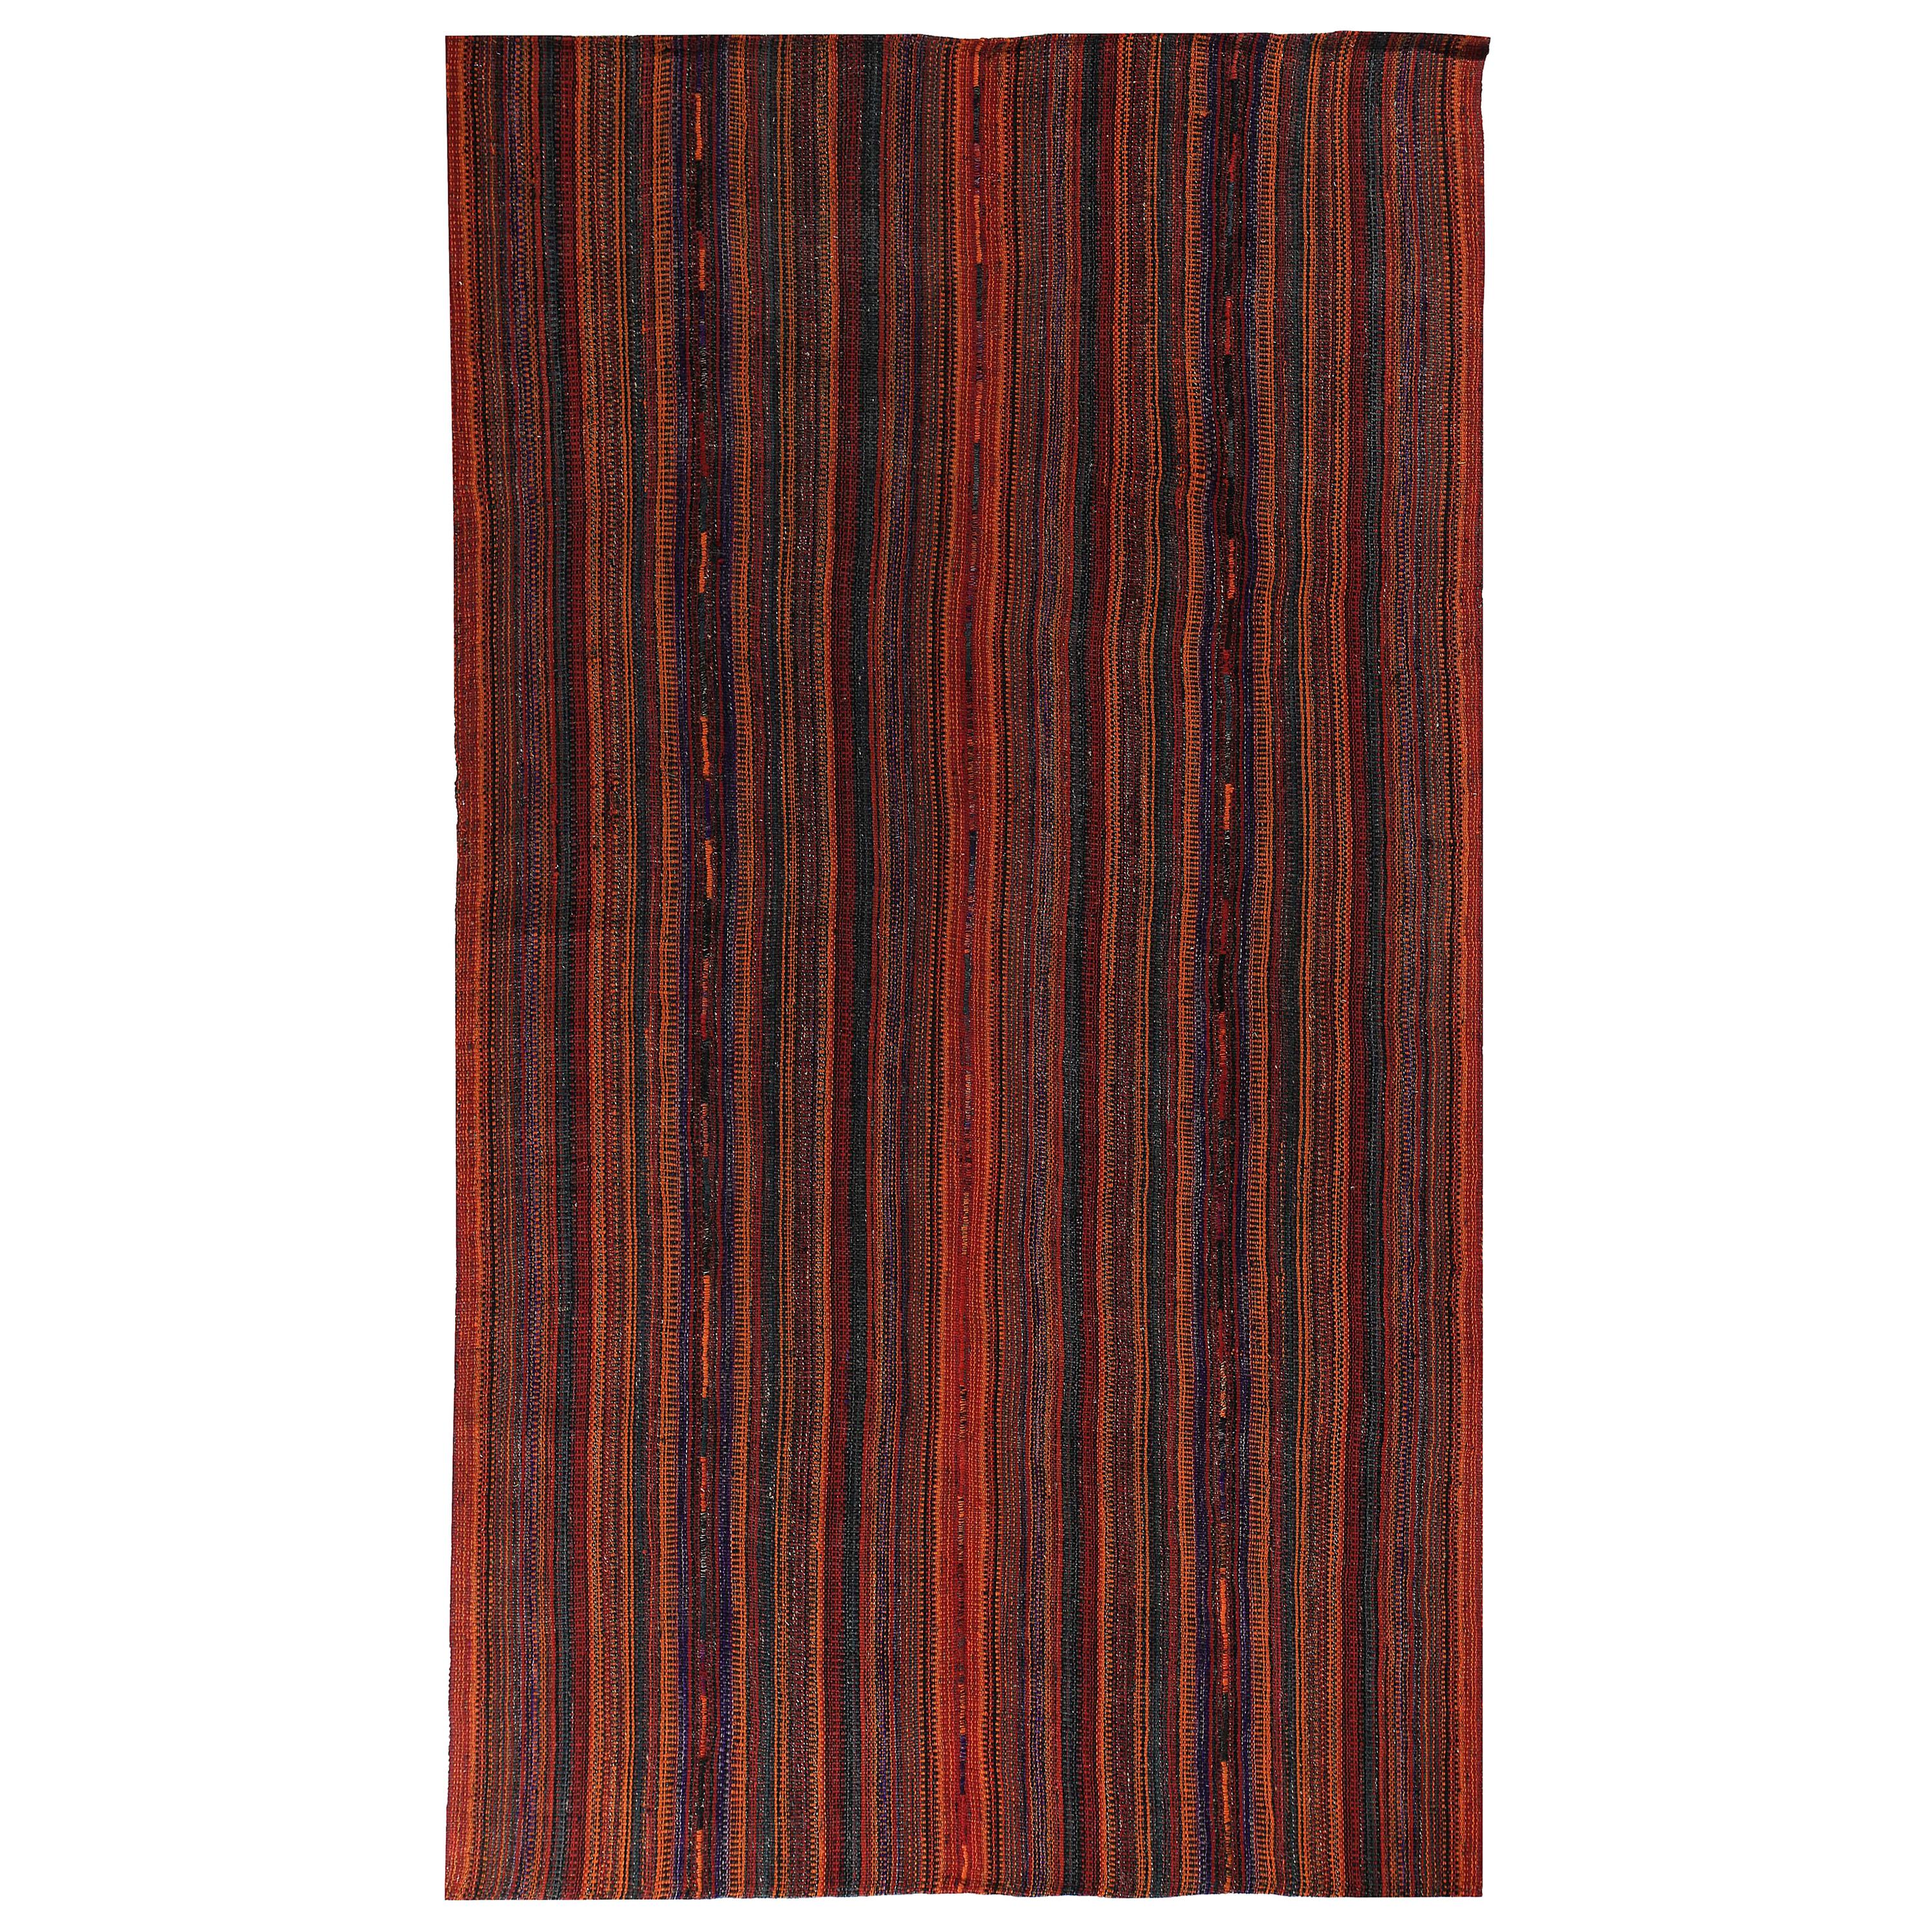 New Turkish Kilim Rug with Black and Red Tribal Stripes For Sale